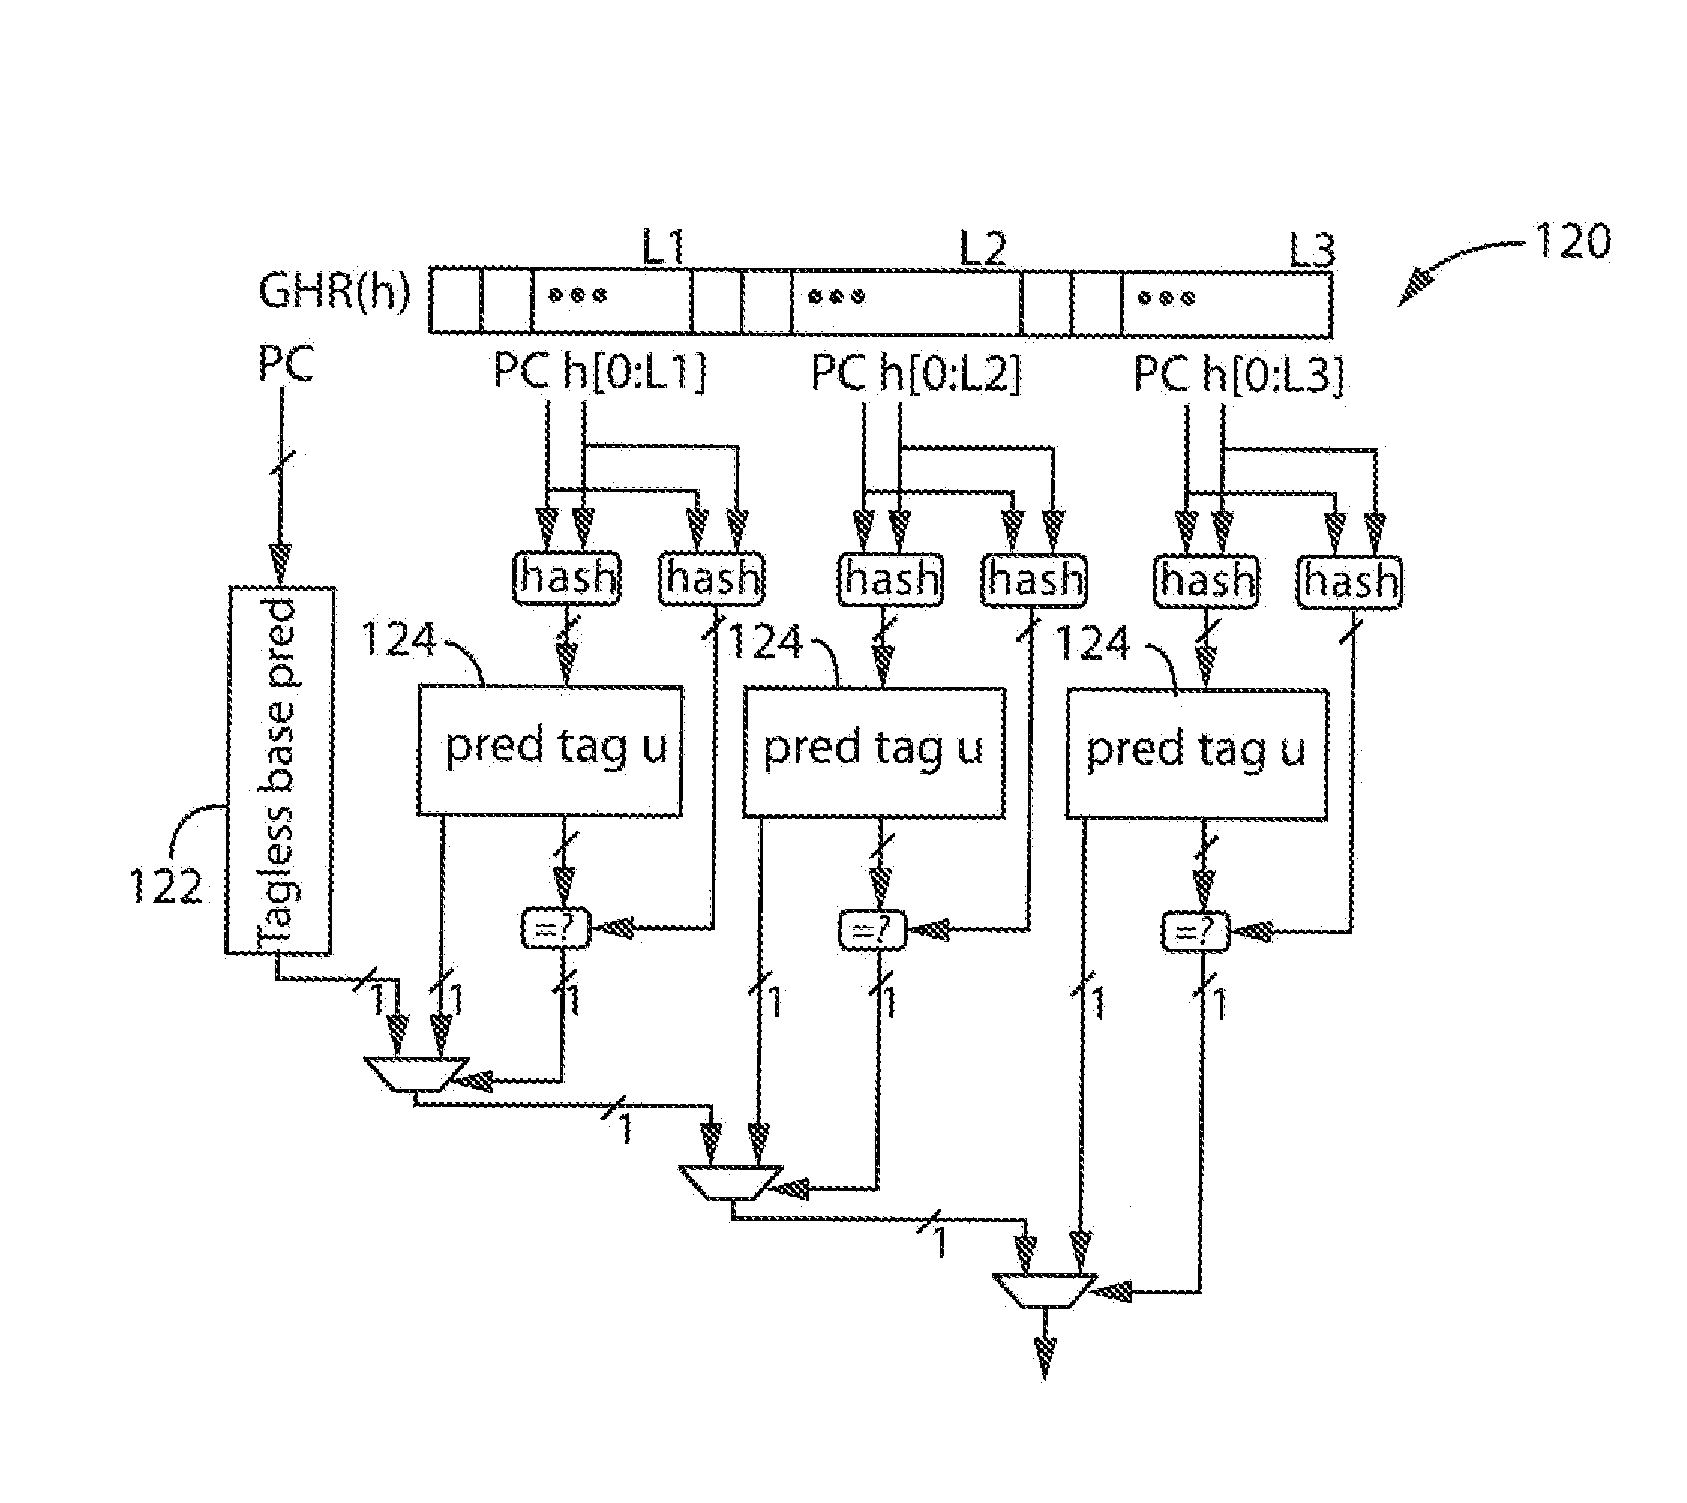 Apparatus and Method for Bias-Free Branch Prediction